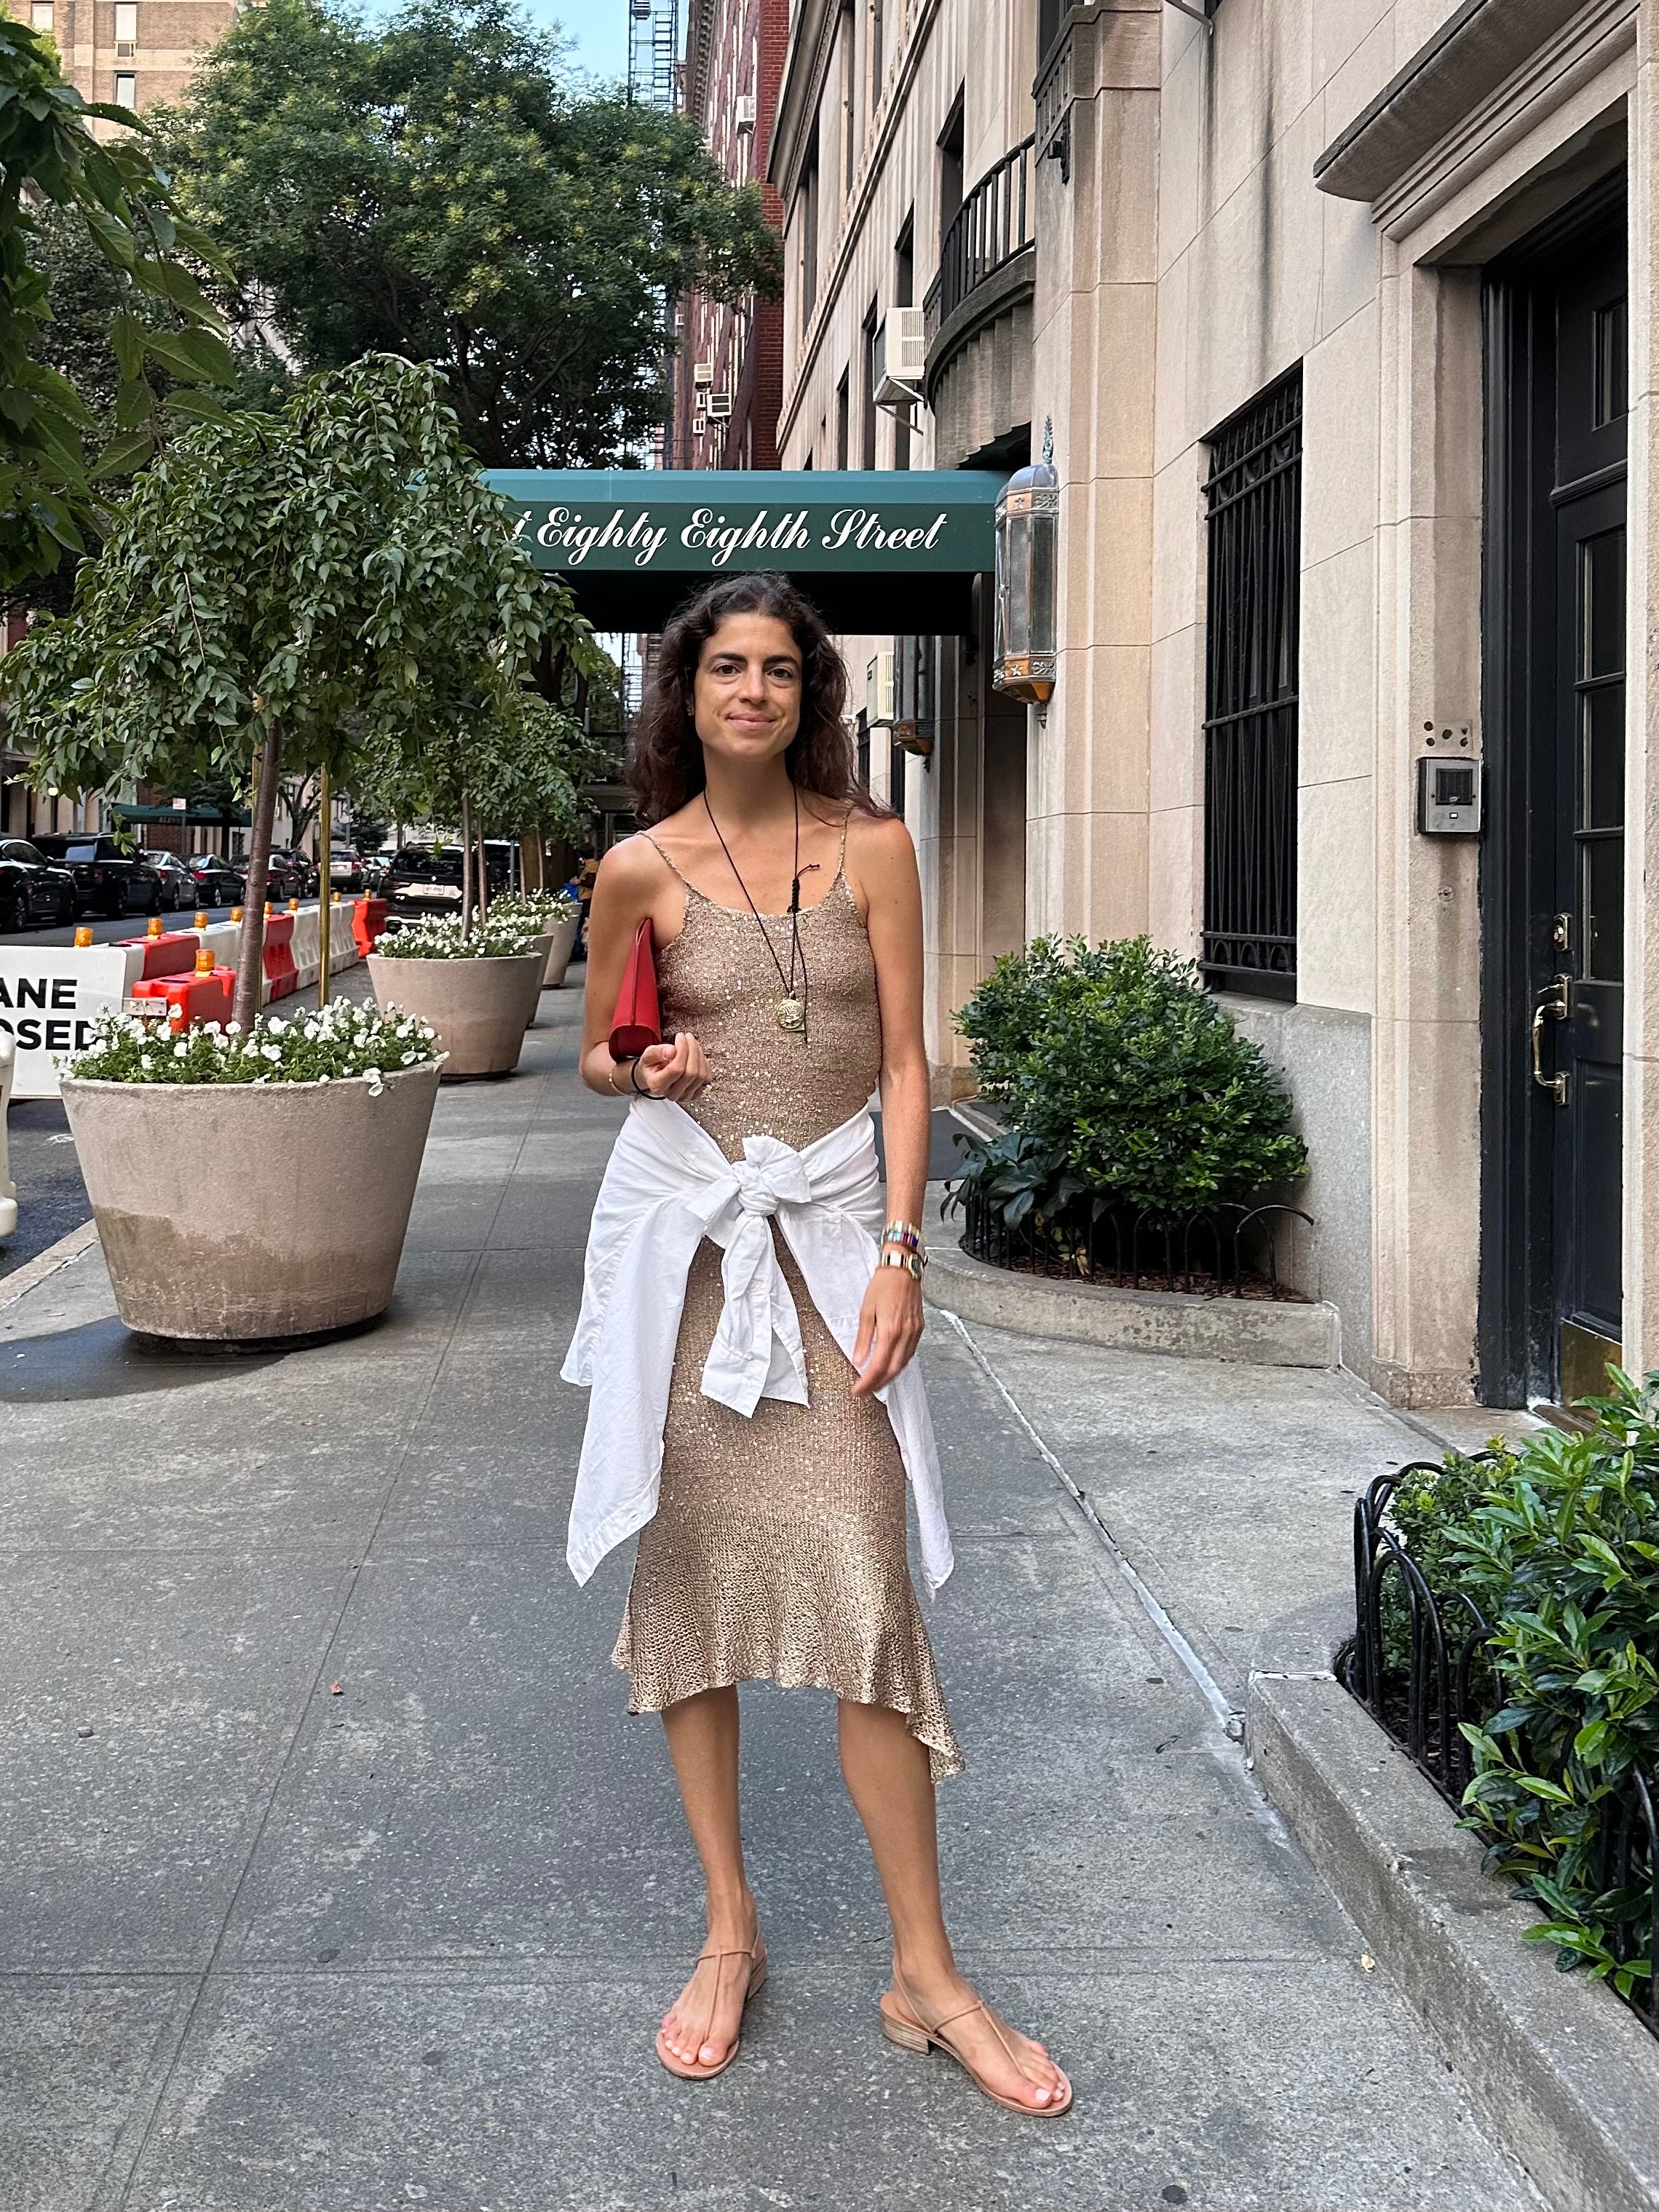 wear summer Leandra how – Cafe dresses and them to Great